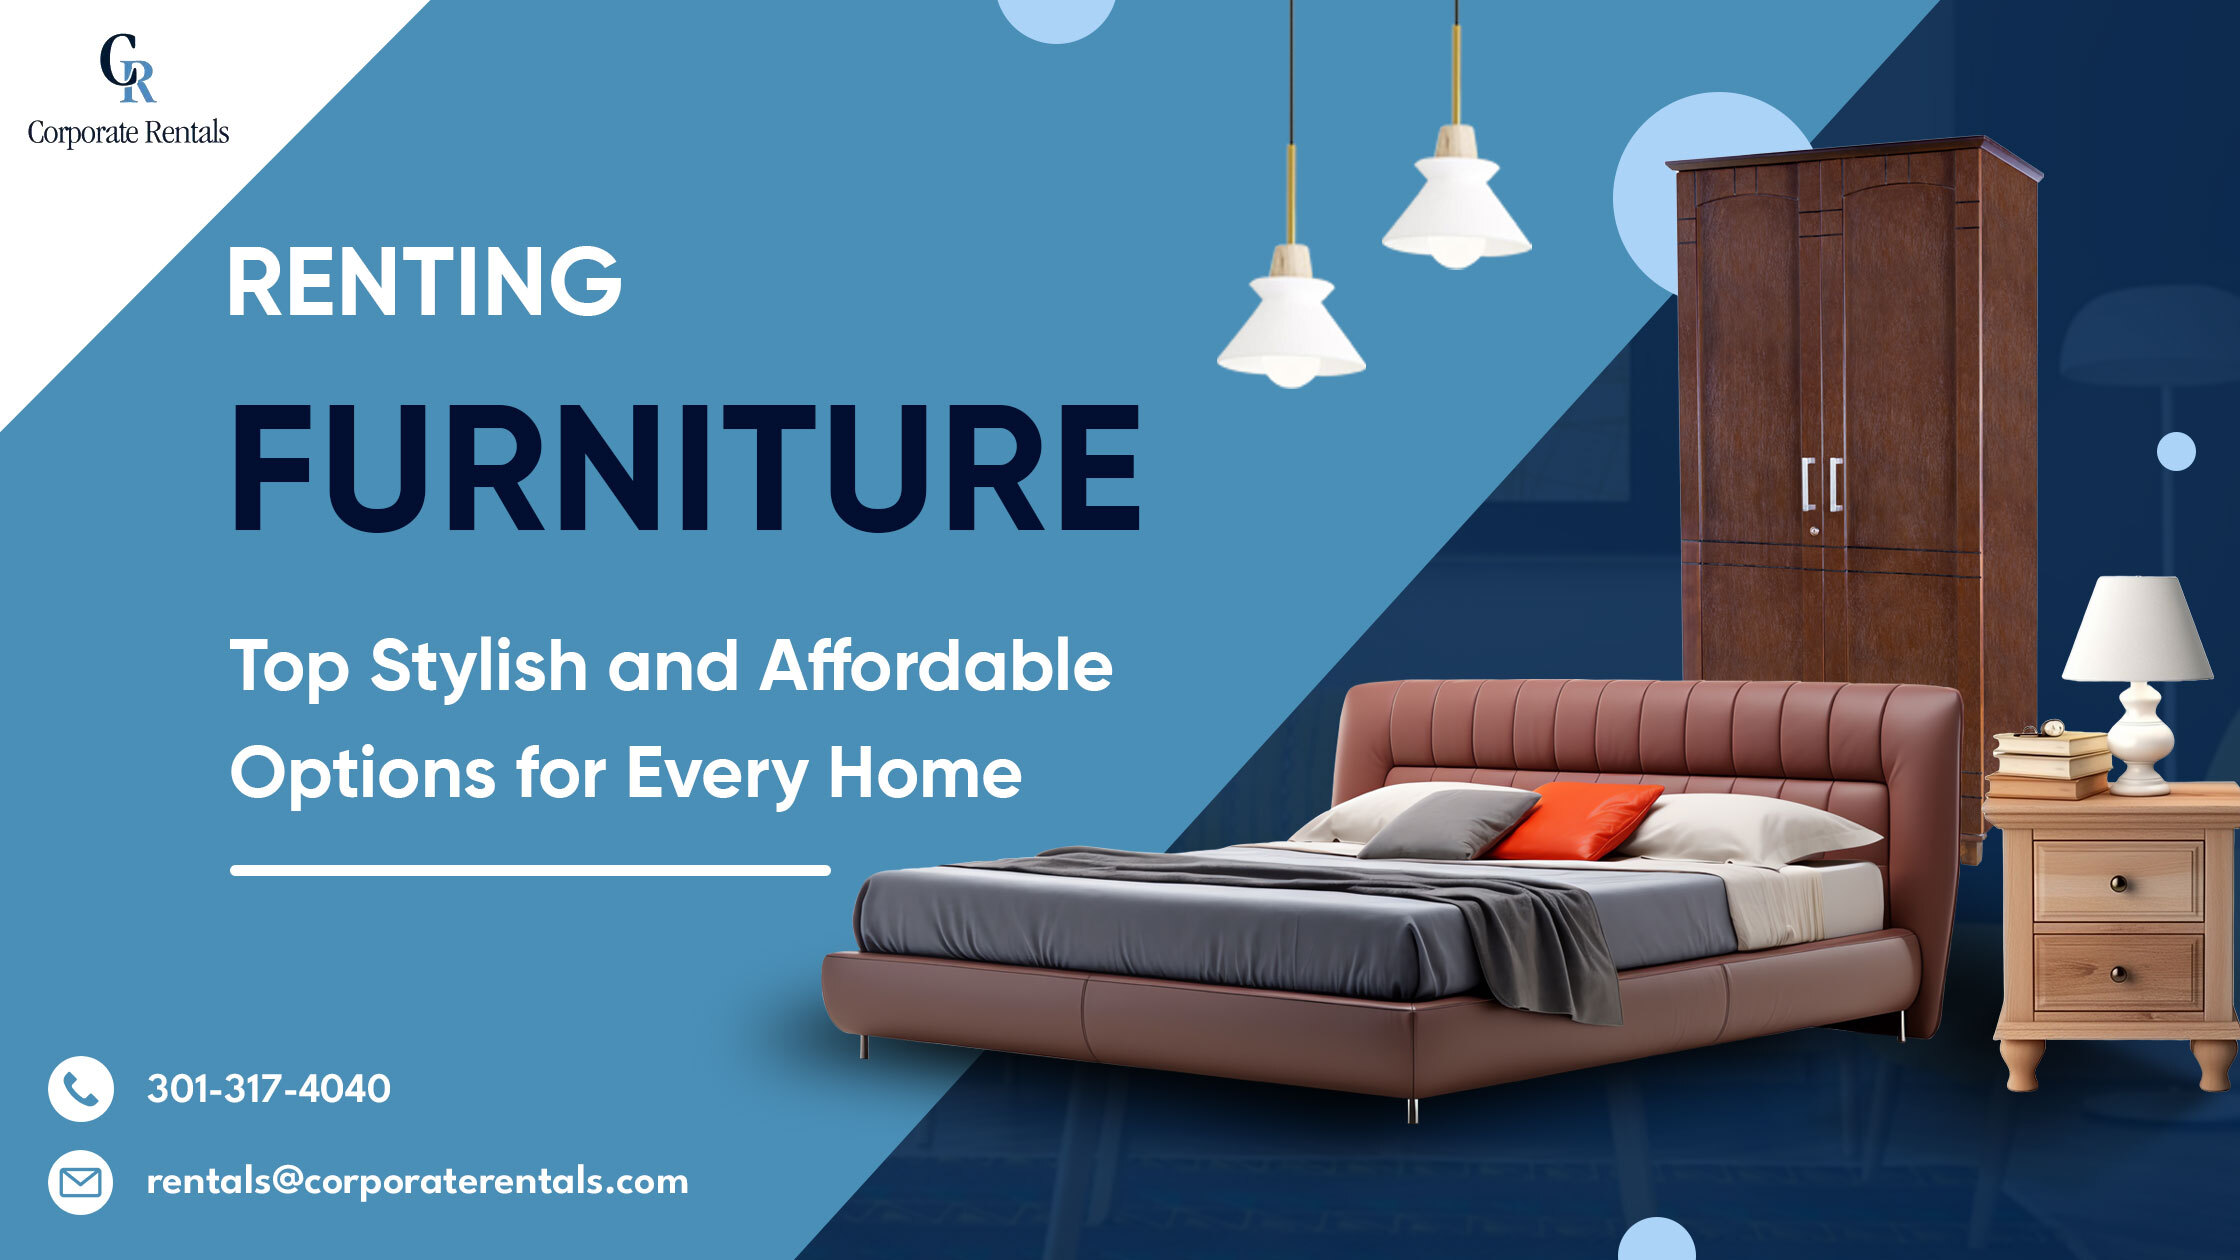 Renting Furniture-Top Stylish and Affordable Options for Every Home